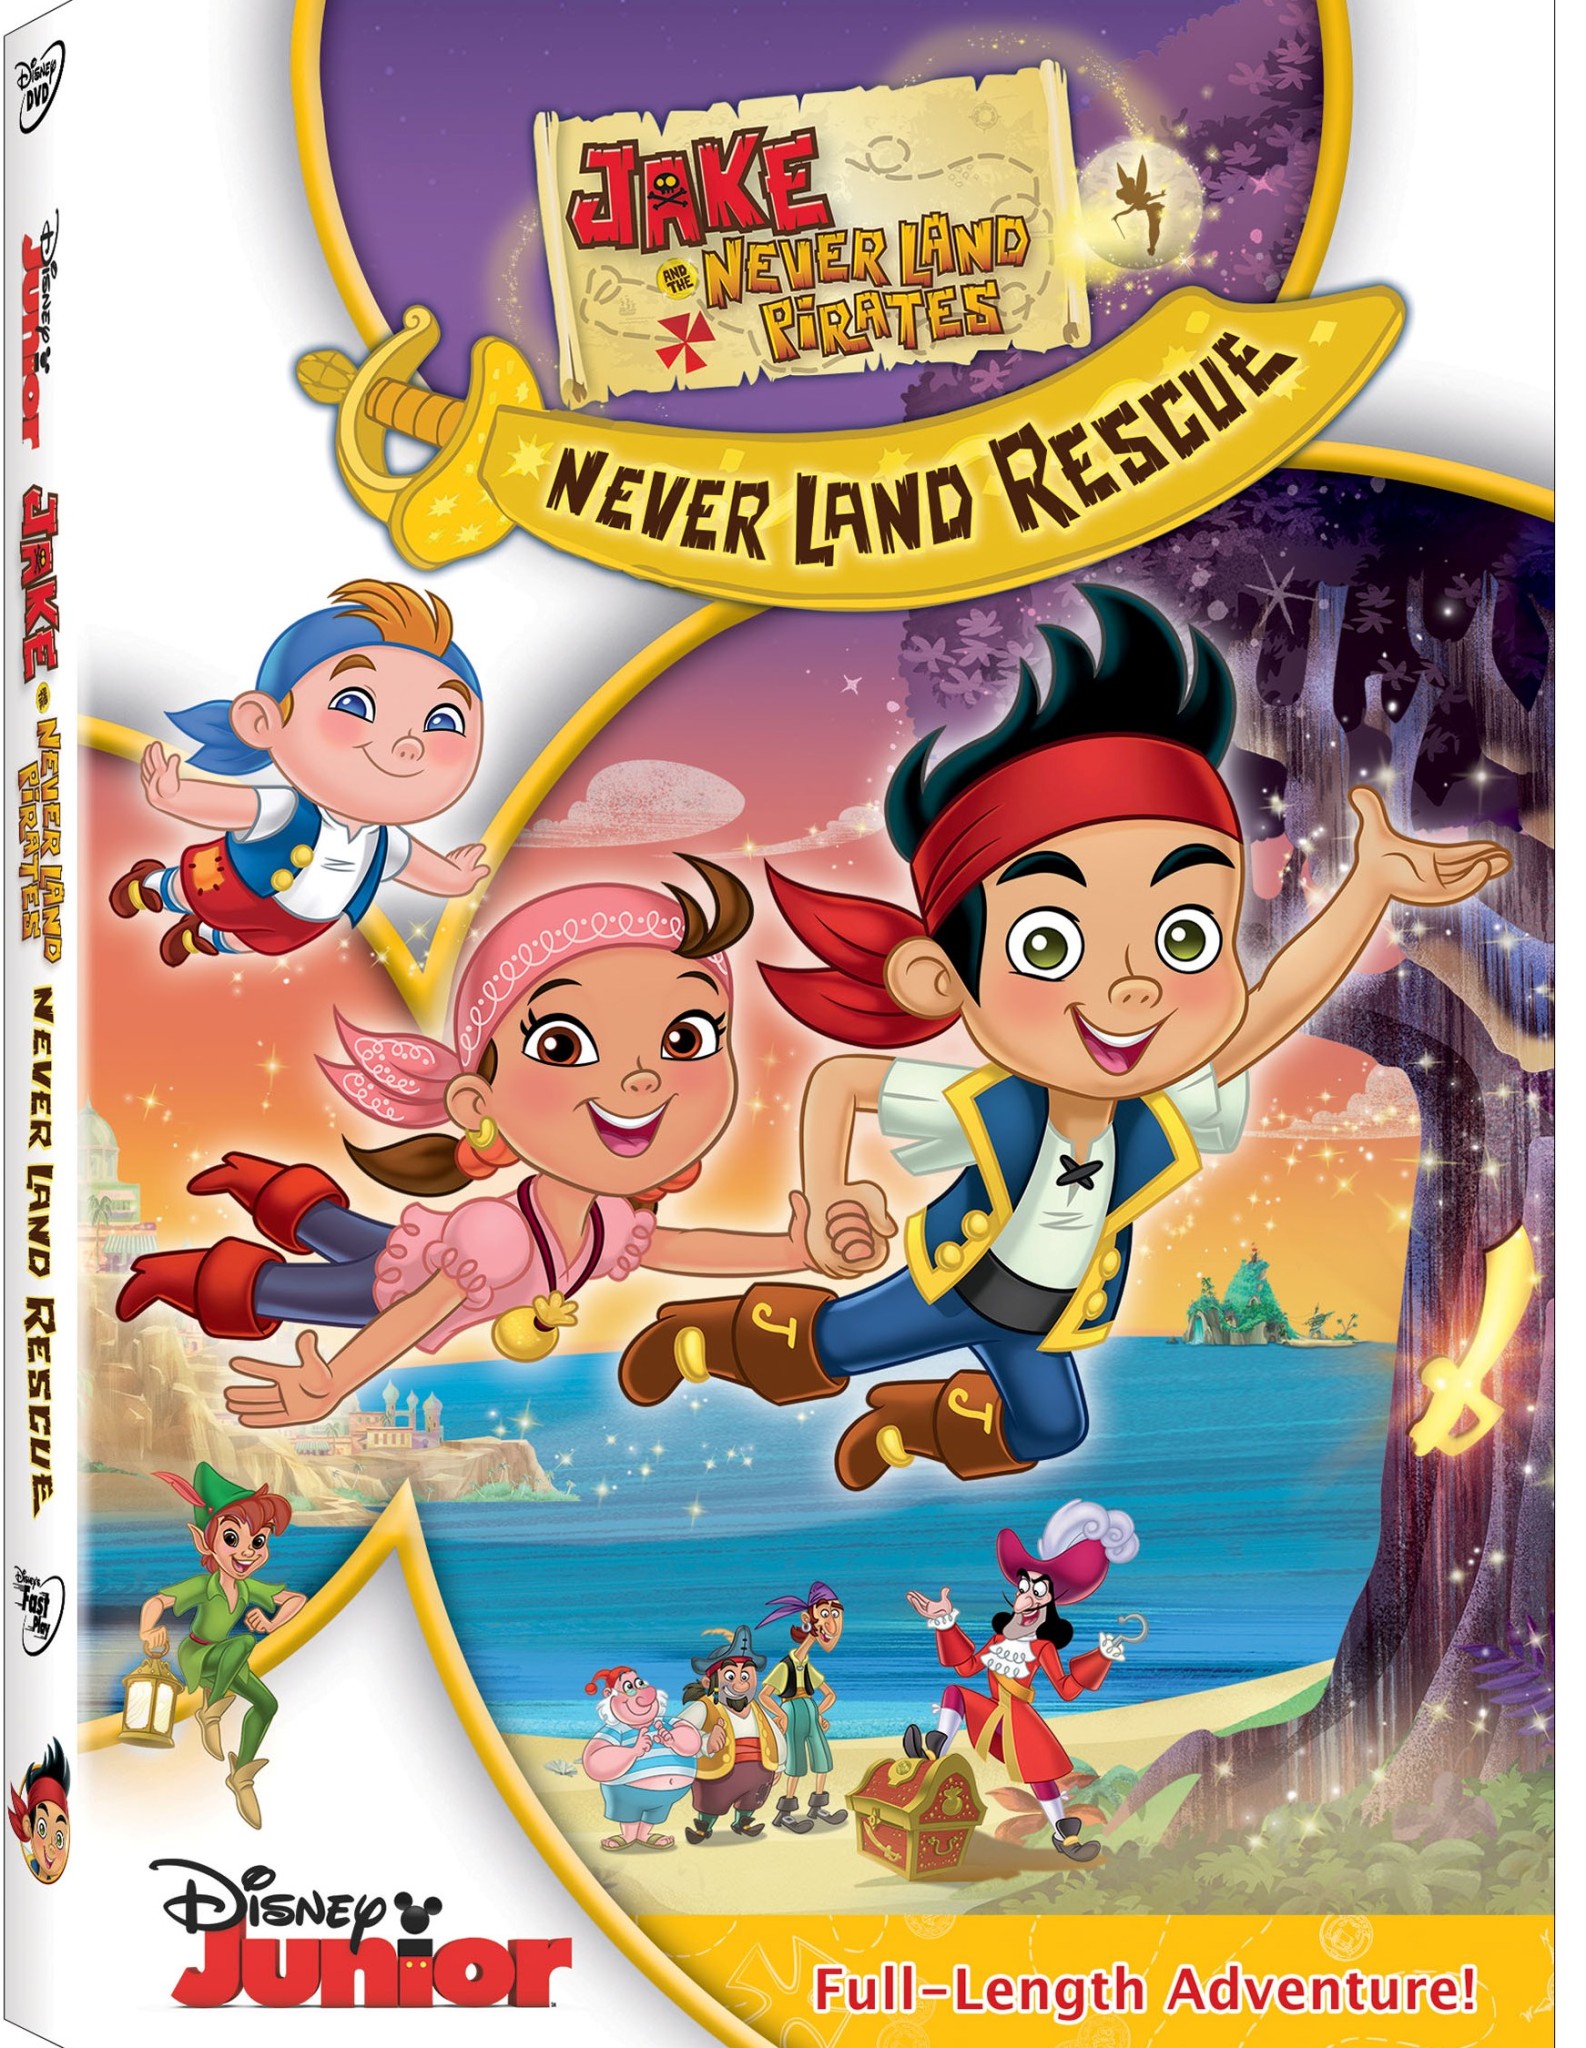 Jake and the Never Land Pirates: Never Land Rescue comes to DVD November 19